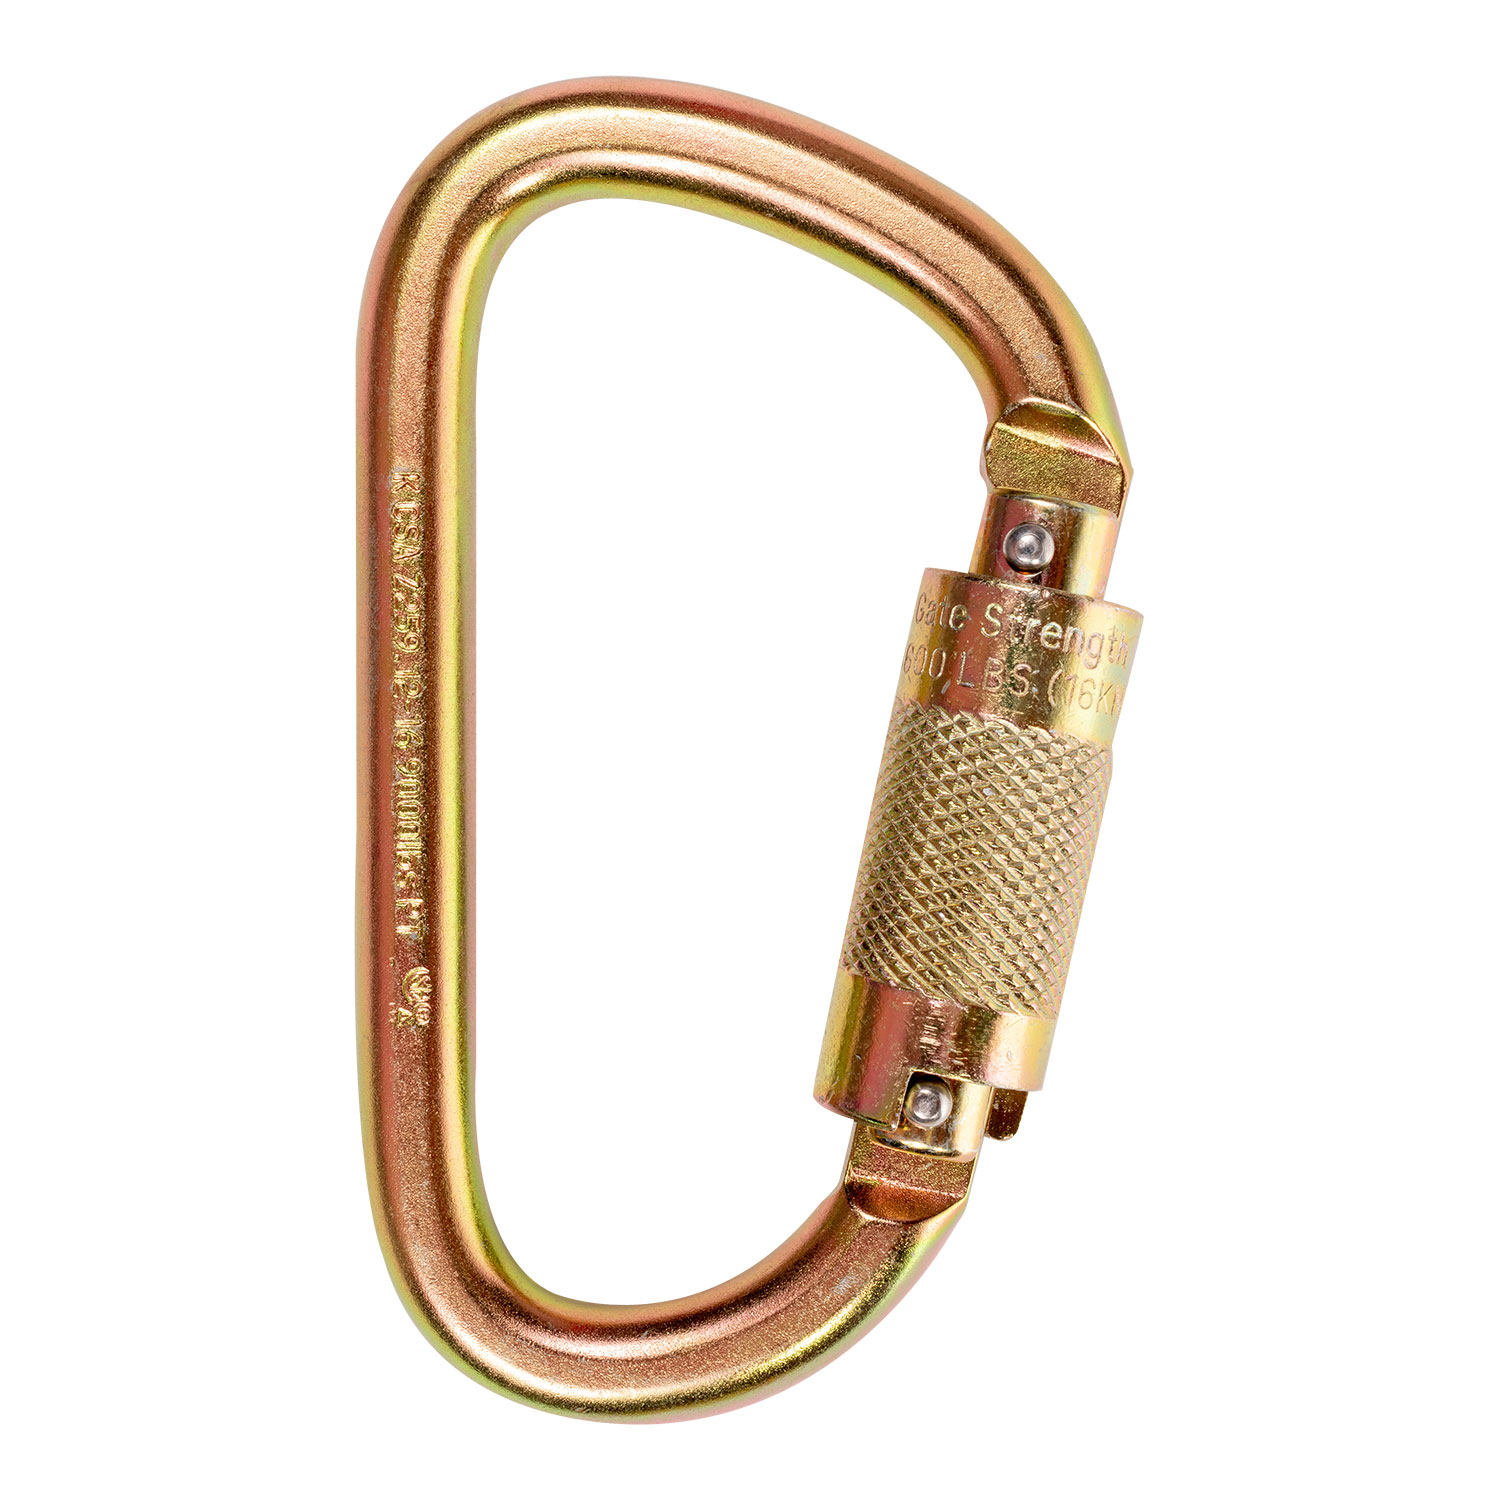 KStrong Small Steel Carabiner (ANSI), .84" Gate Opening, UFC401100 - Click Image to Close